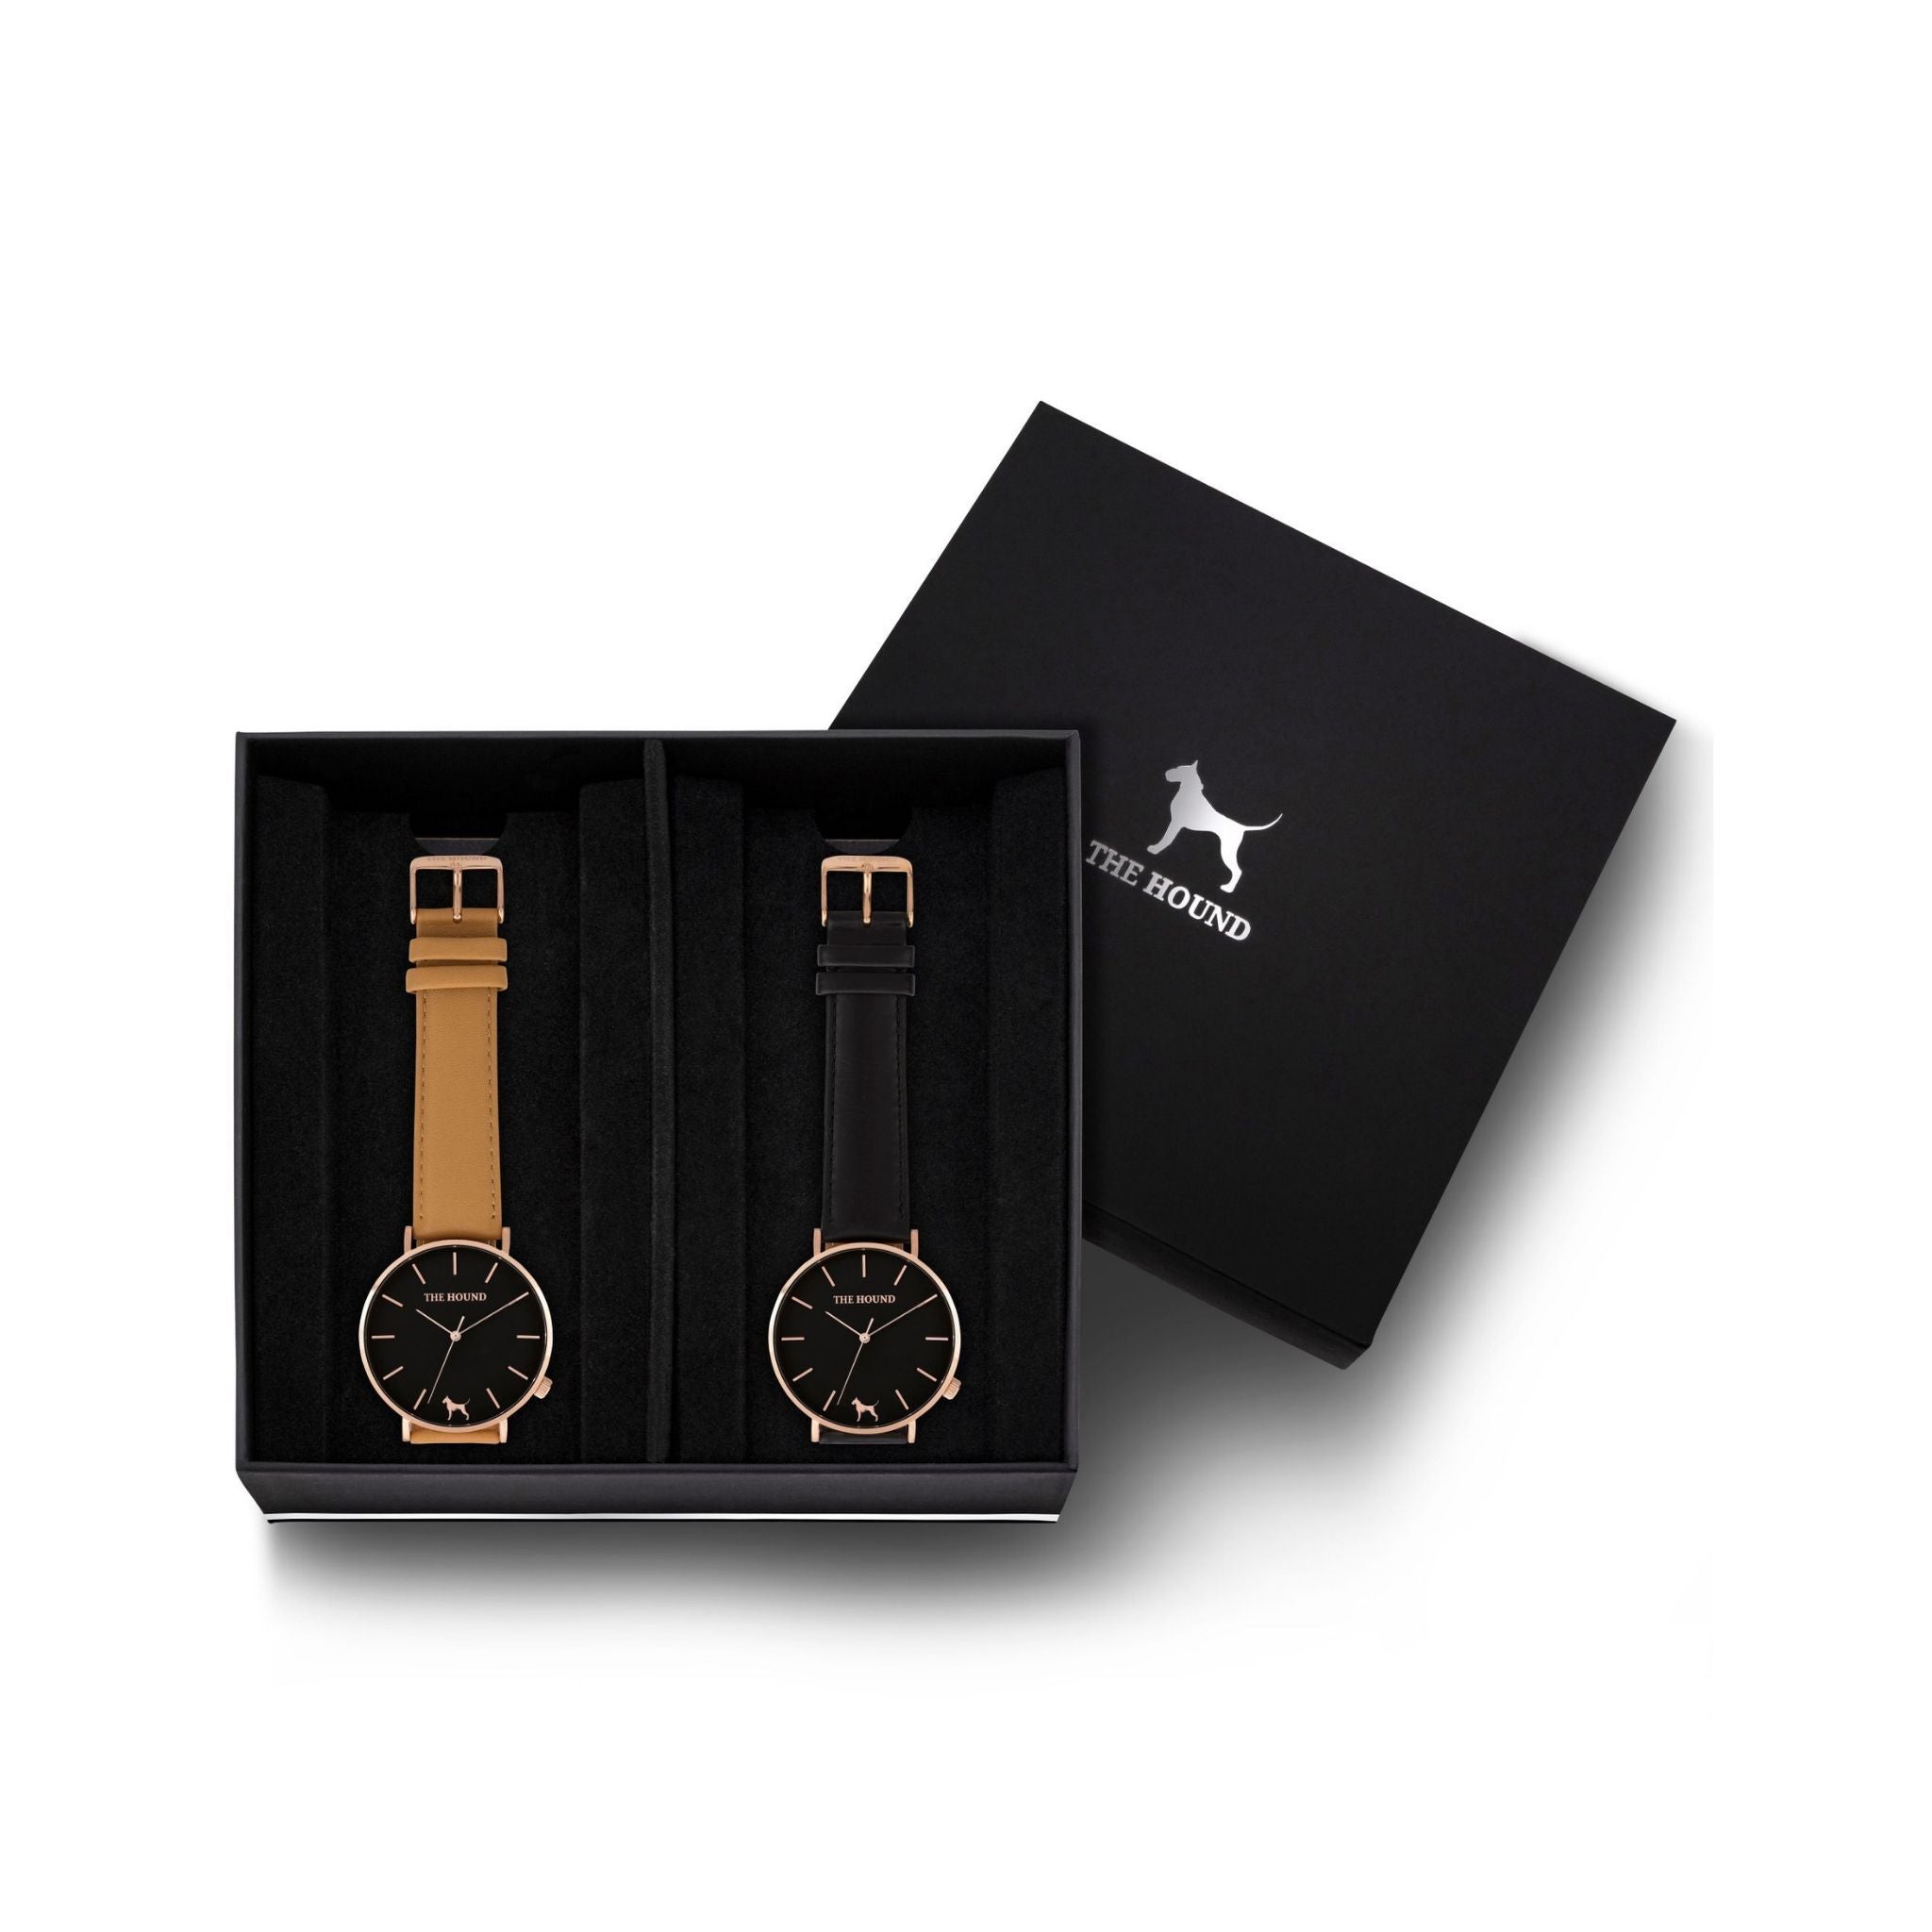 Custom gift set - Rose gold and black watch with stitched camel genuine leather band and a rose gold and black watch with stitched black genuine leather band